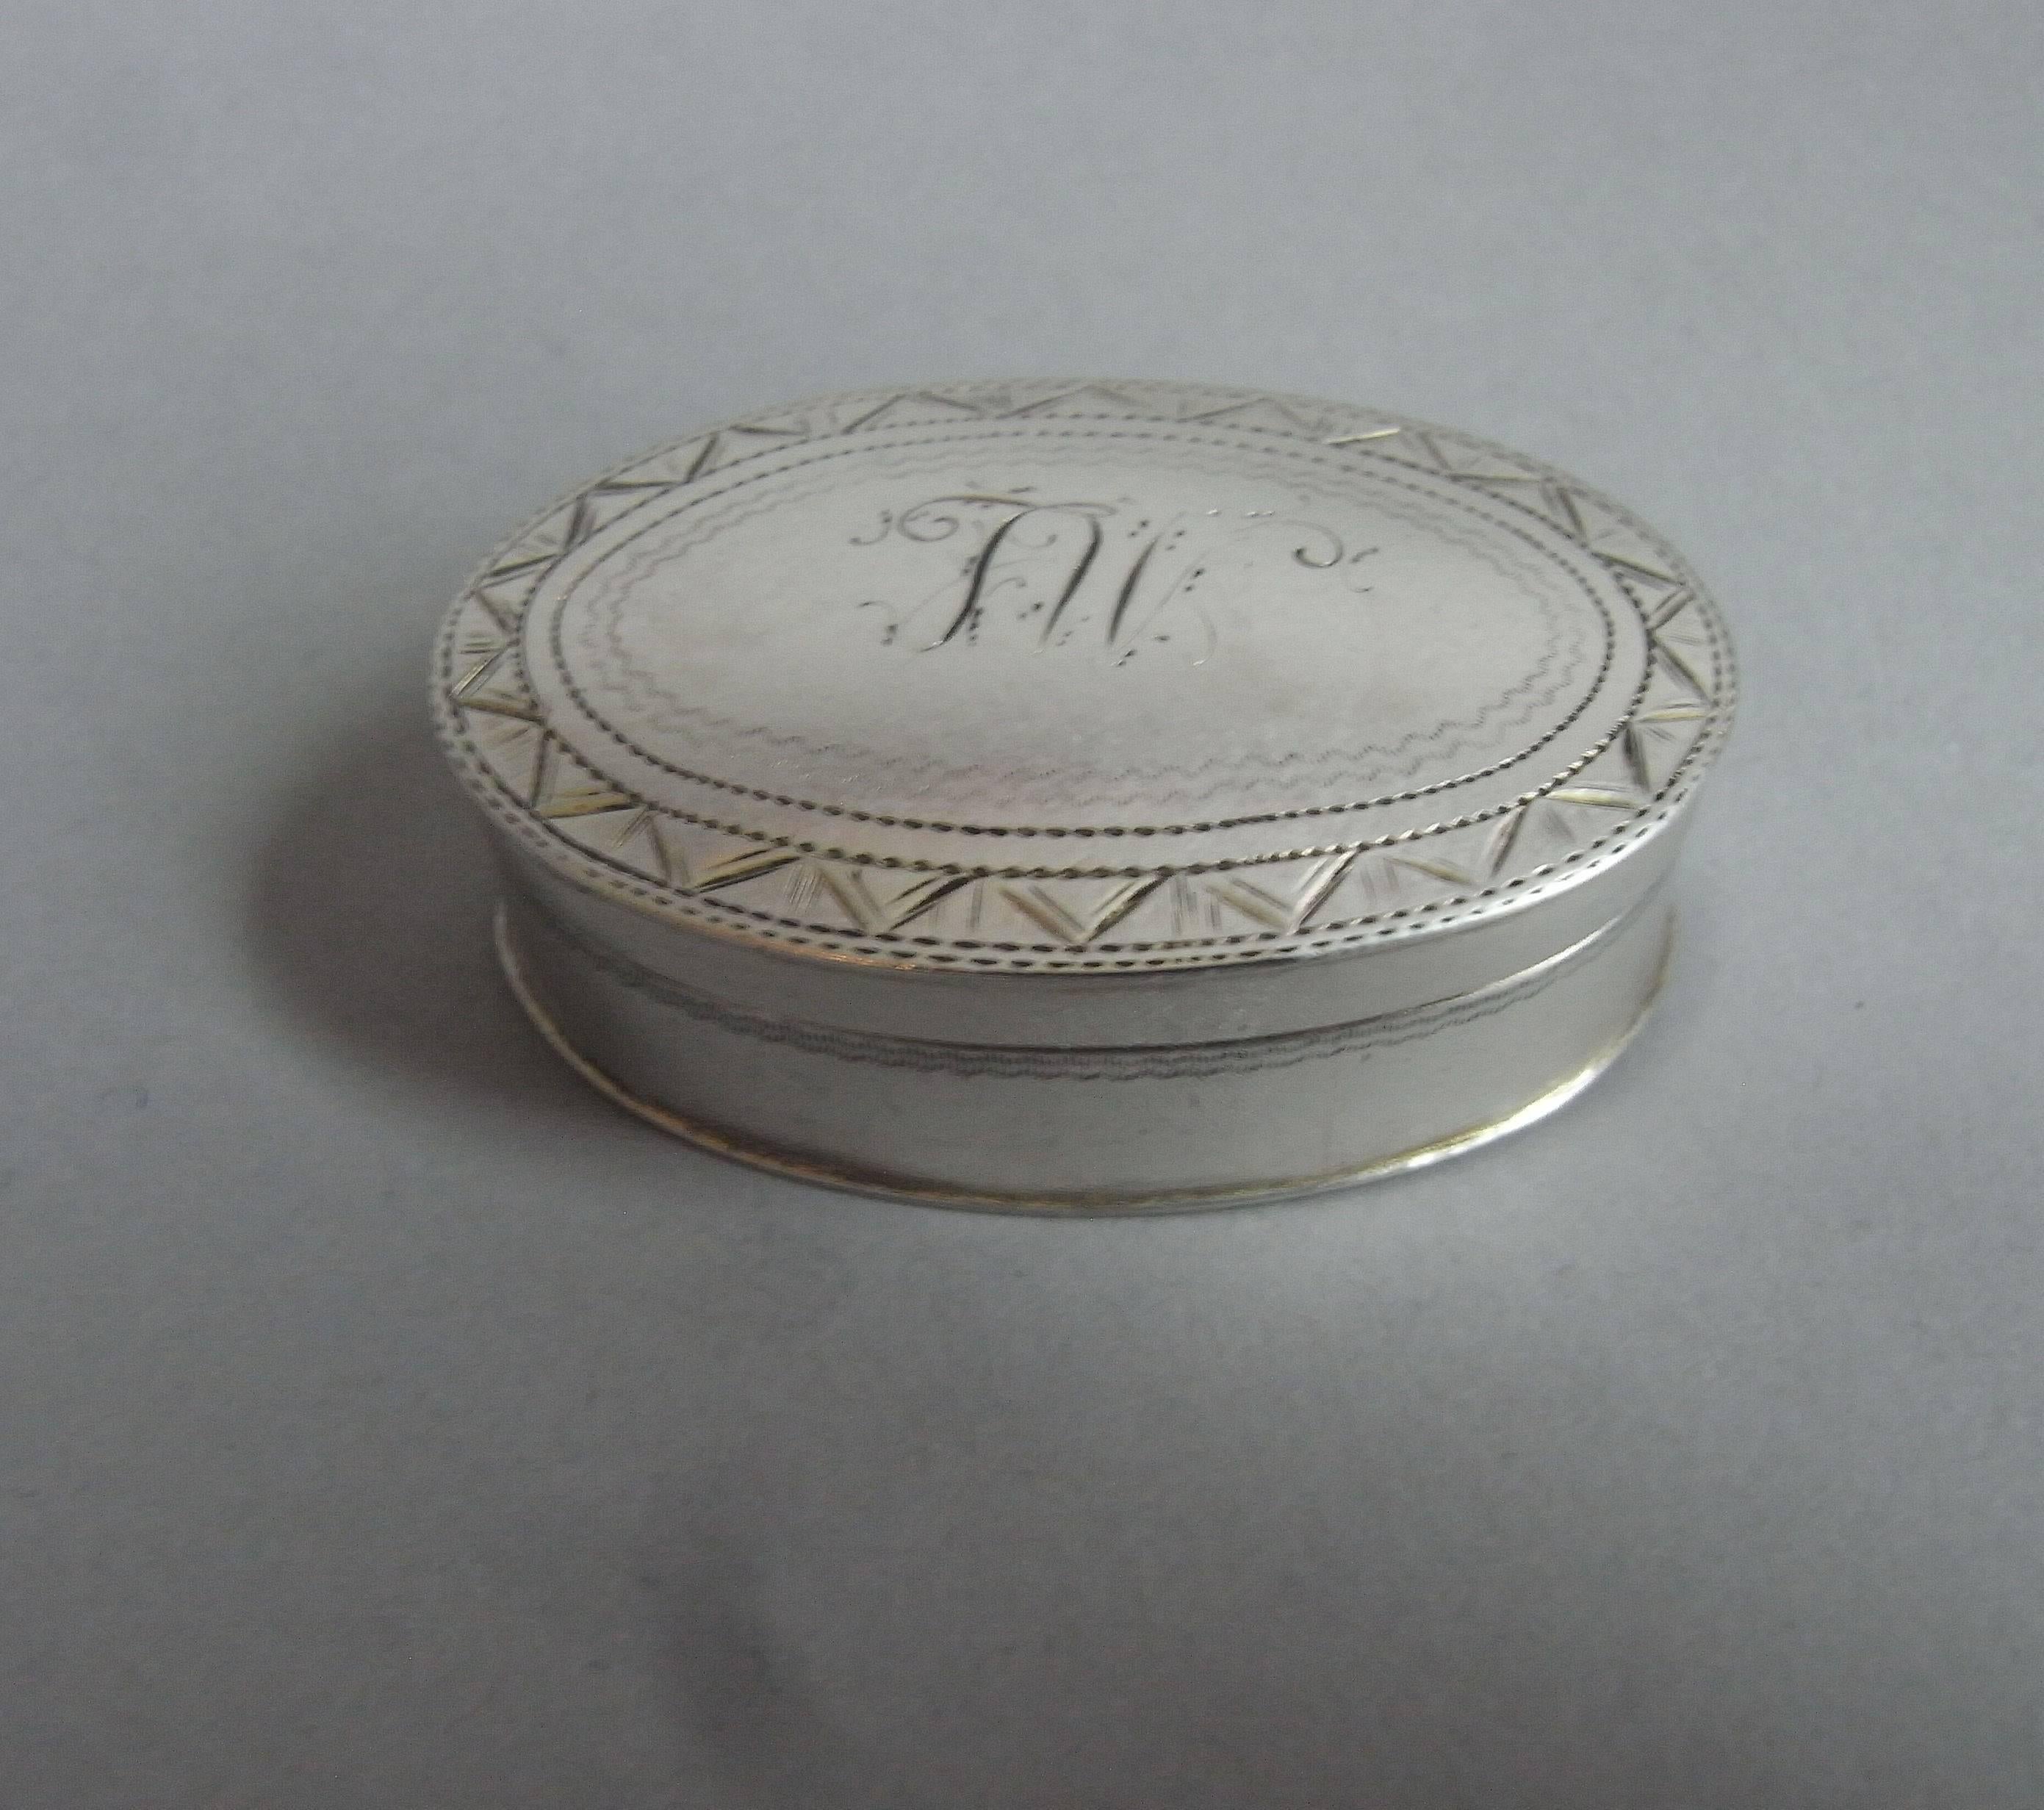 The patch box is of an unusually large oval form, with a pull off cover. The cover is decorated with an outer prick dot and arrow head border, around a set of contemporary script initials. The base is engraved with prick dot bands. The box has a